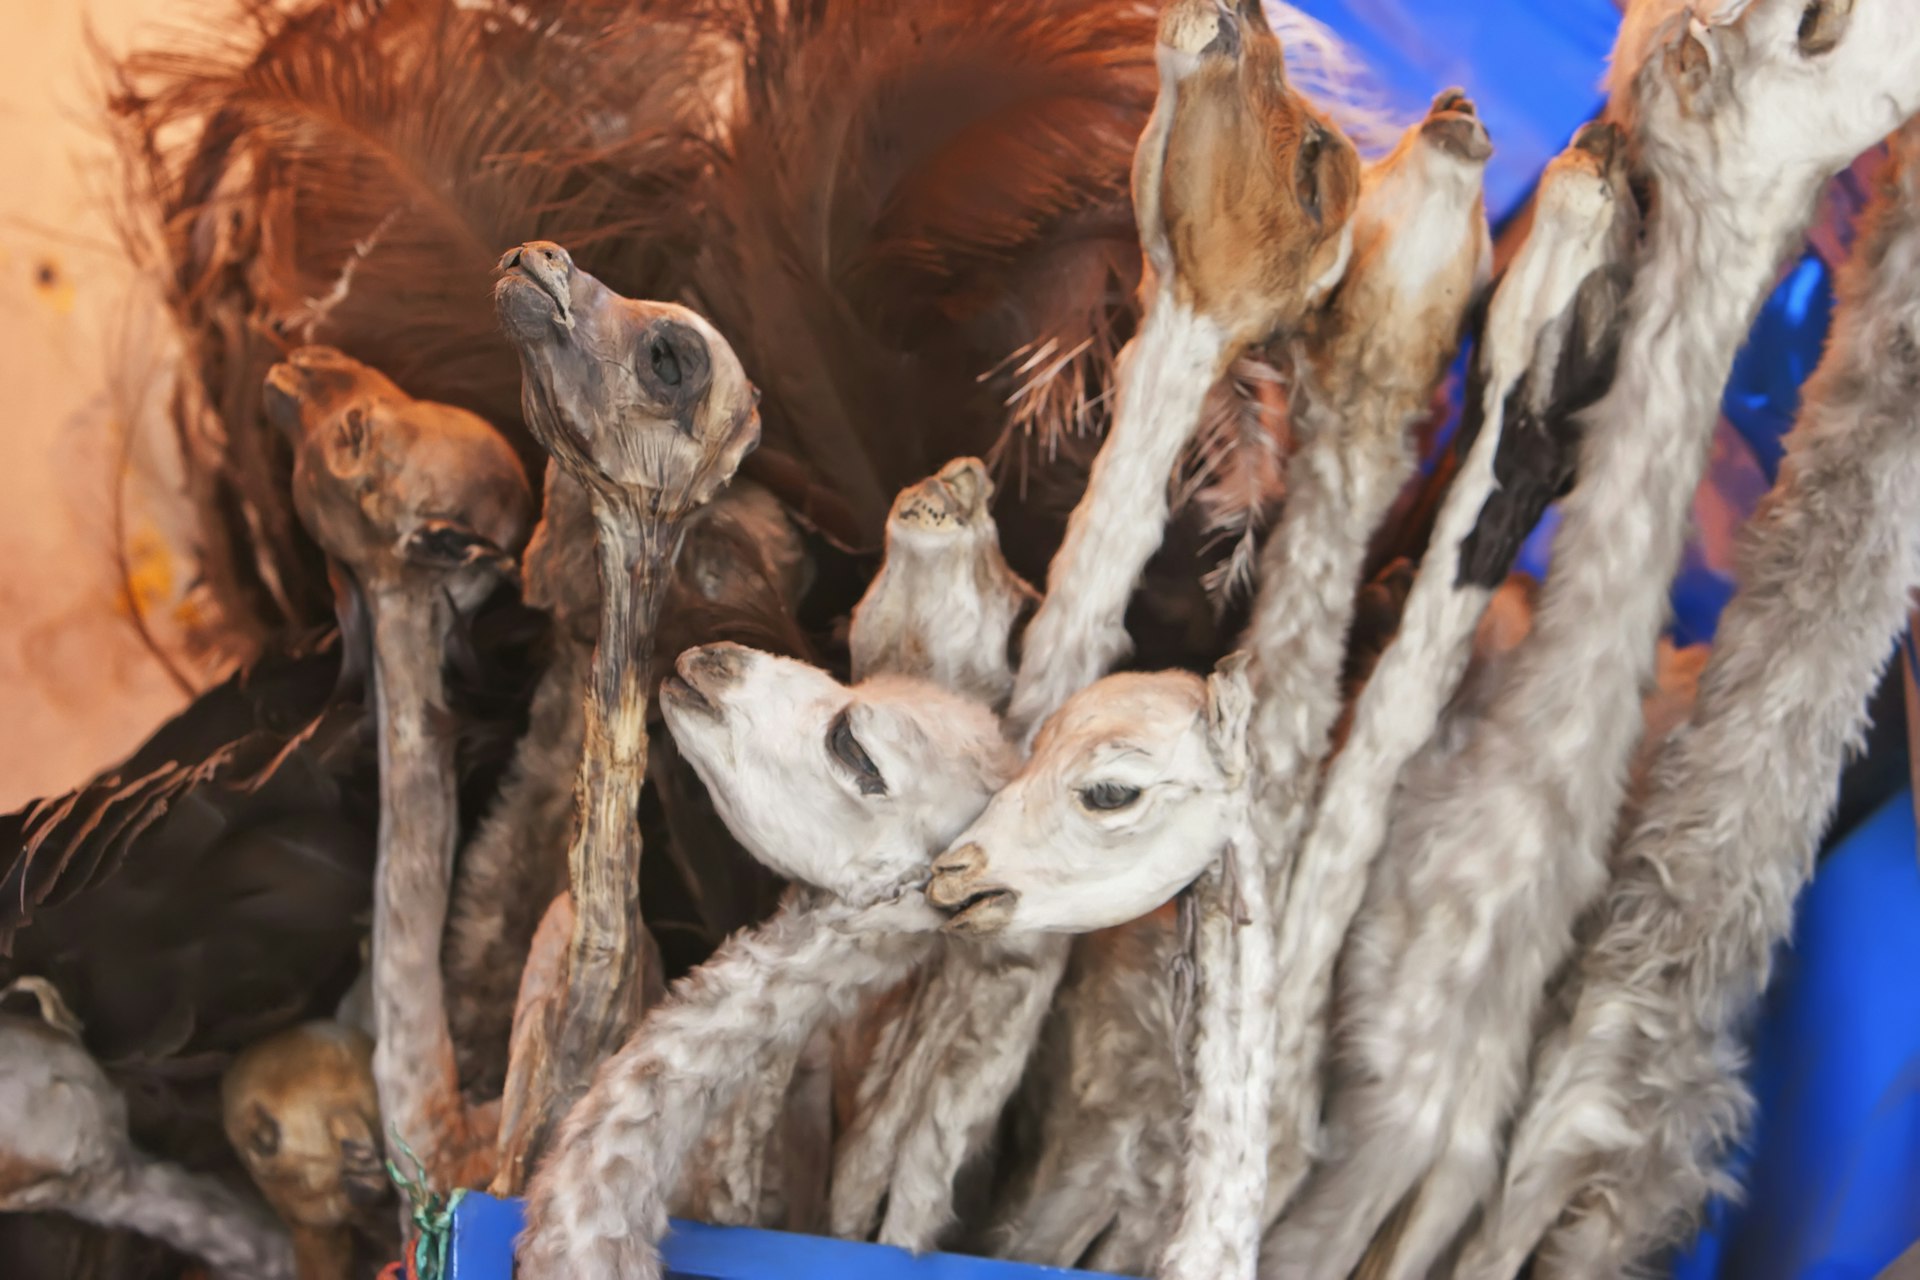 Features - Llama Foetuses For Sale At The Mercado De Las Brujas (Witches' Market) On Calle Linares In La Paz. These Are Used In Ancient Inca Rites To Bring Good Luck Or The Good Will Of The Goddess Pachamama (Mother Earth)., La Paz Department, Bolivia